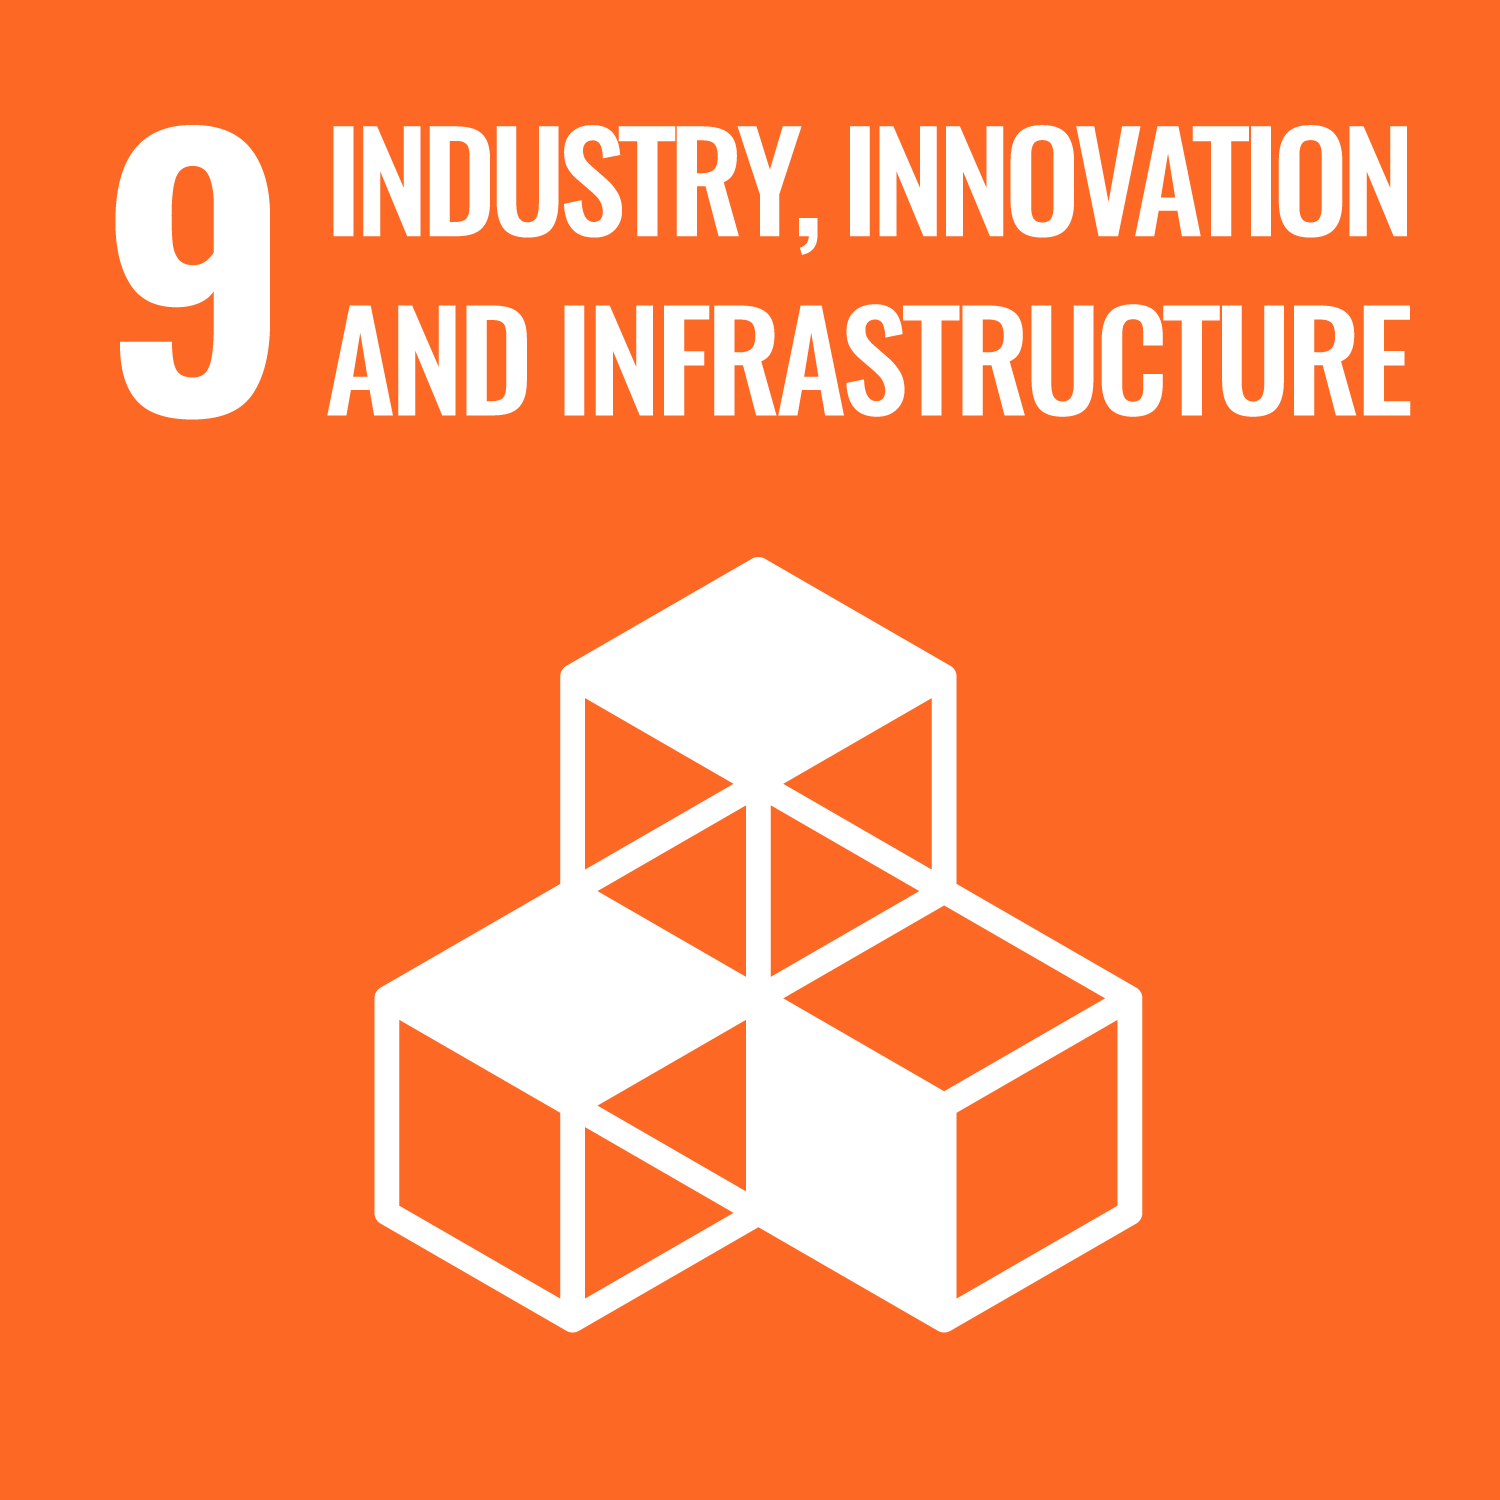 Sustainable Development Goal 9 – Industry, Innovation and Infrastructure